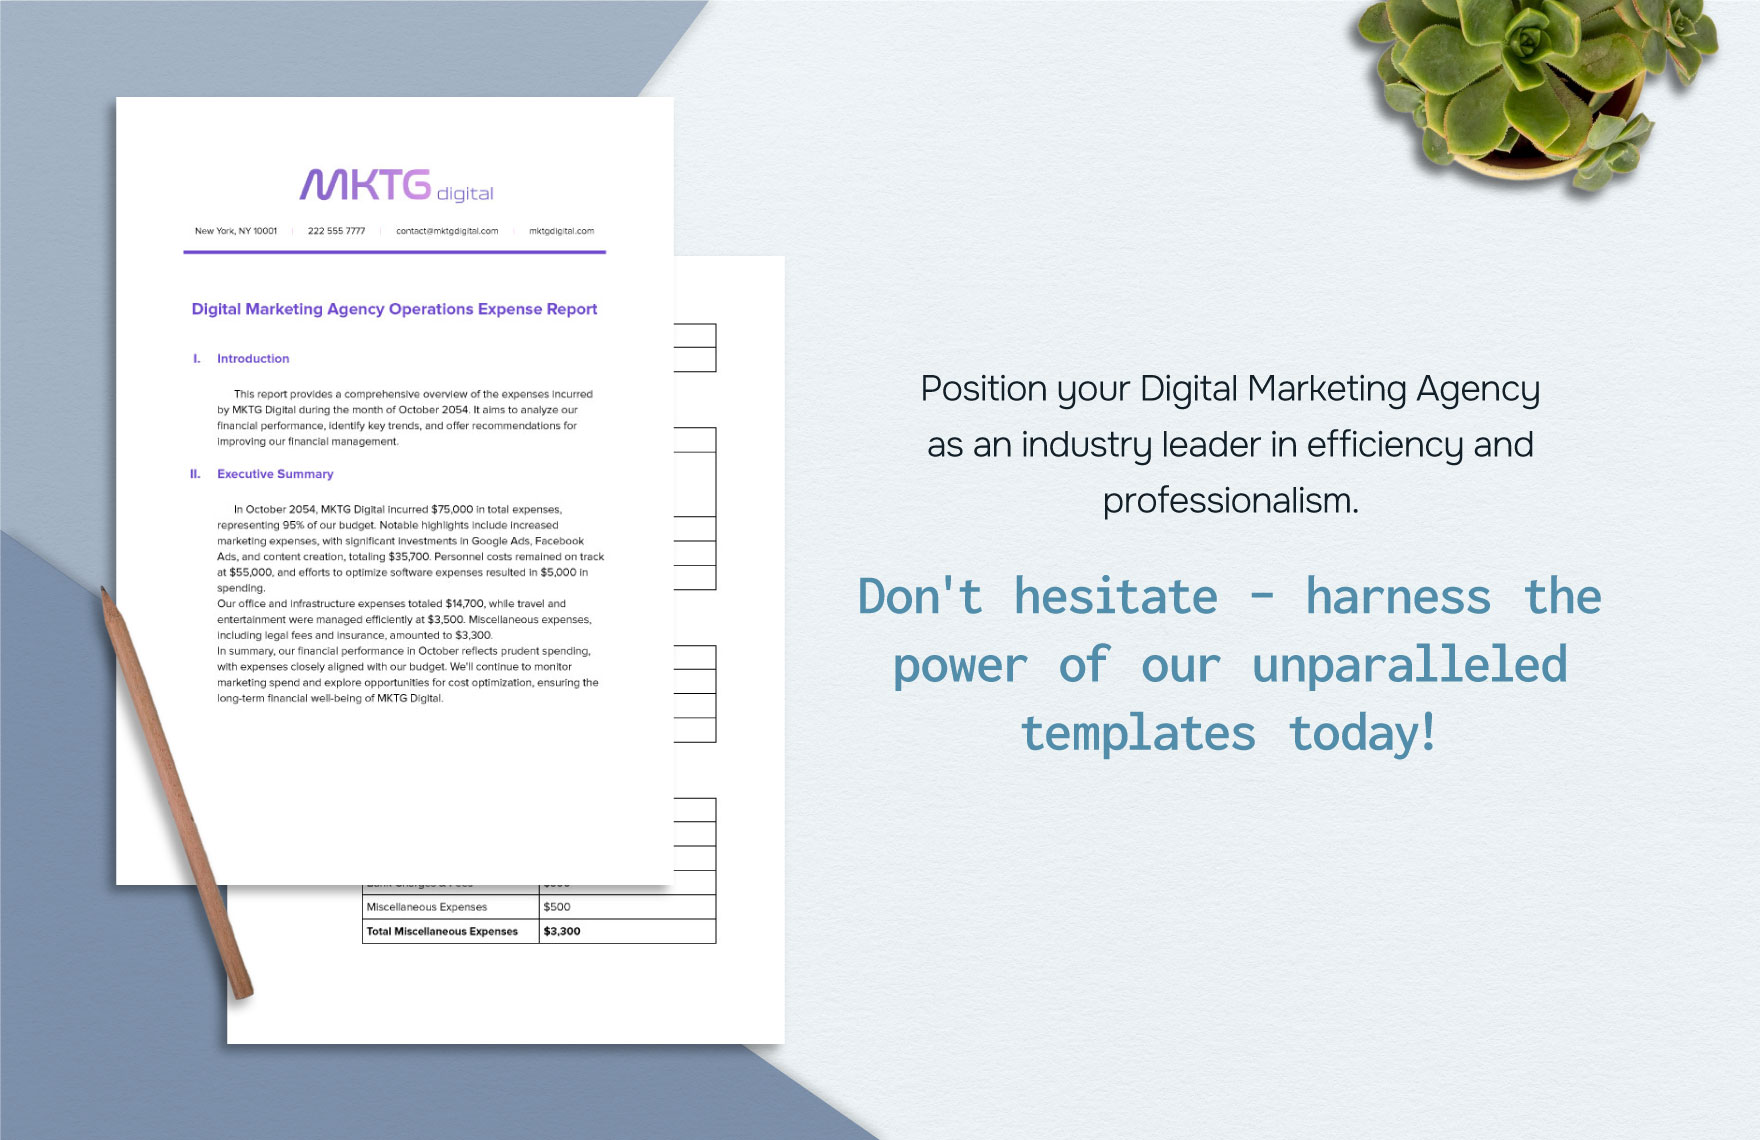 Digital Marketing Agency Operations Expense Report Template